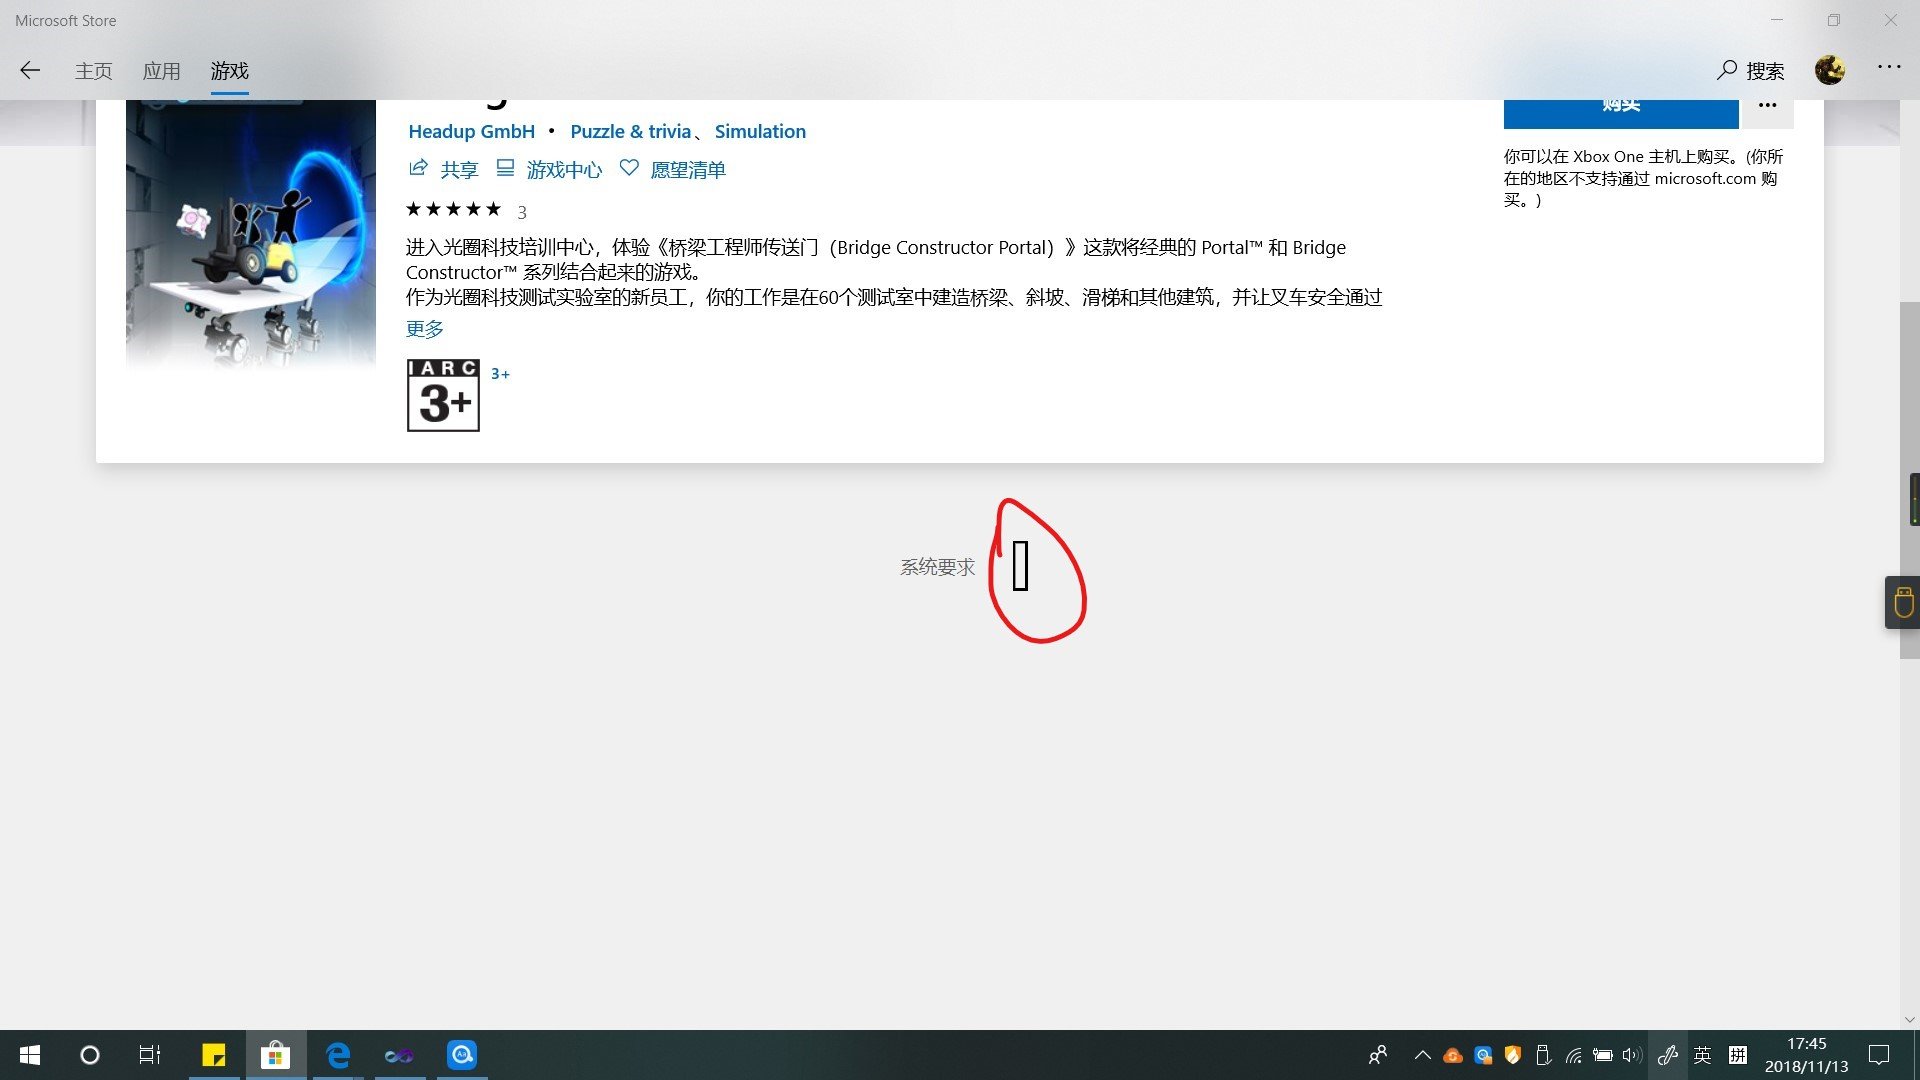 why can't i see reviews in microsoft store? 3847936d-1b4d-48b6-b69d-aff23c39c173?upload=true.jpg